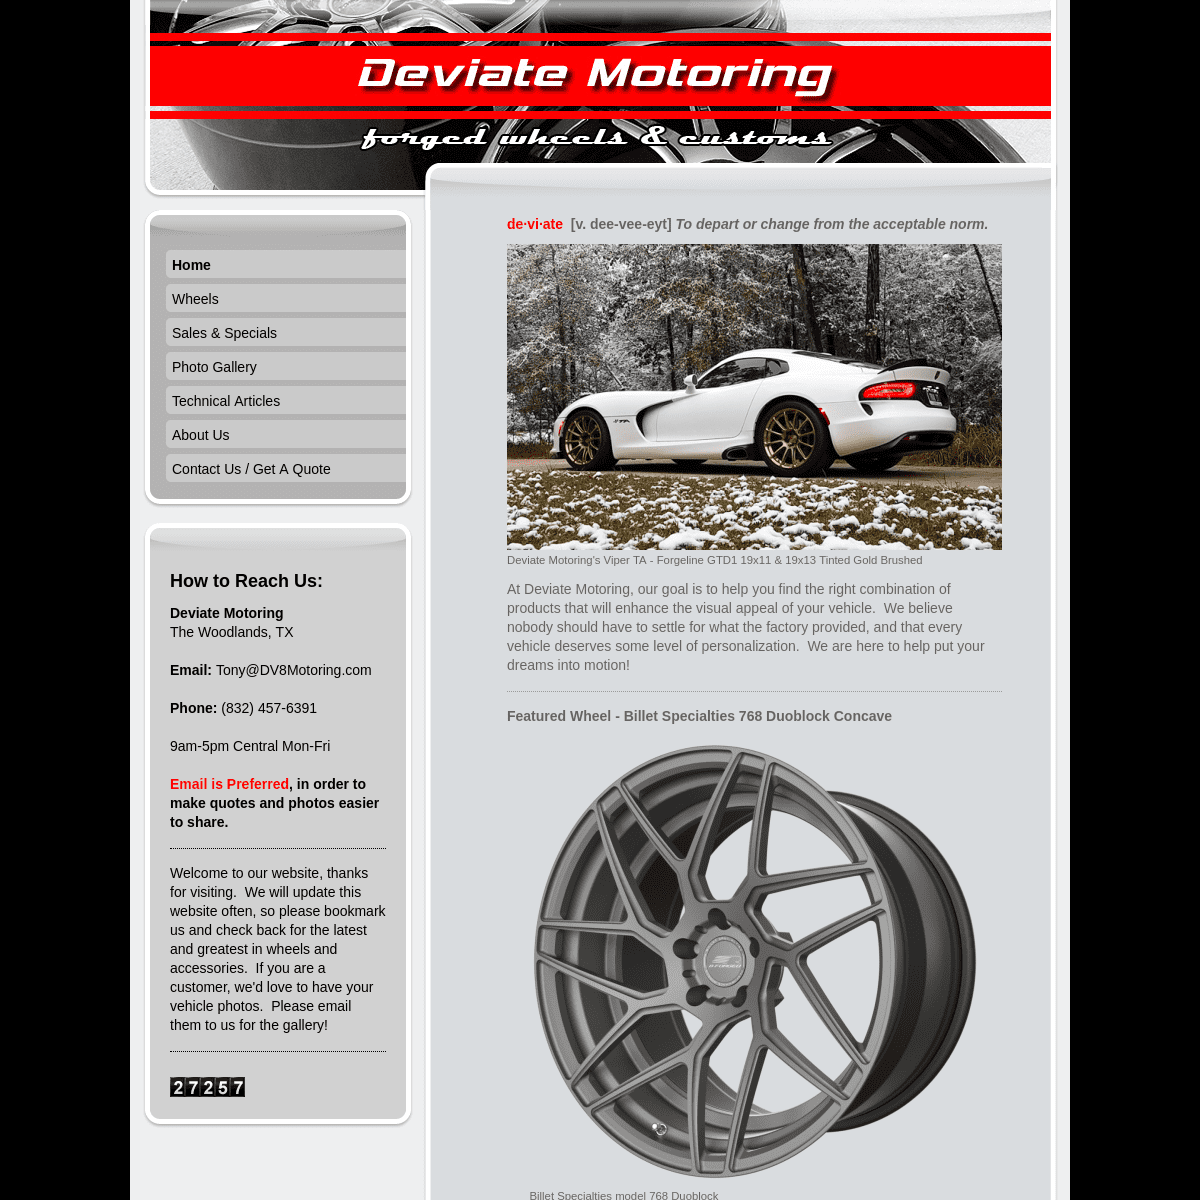 Deviate Motoring - Forged Wheels & Customs - Home